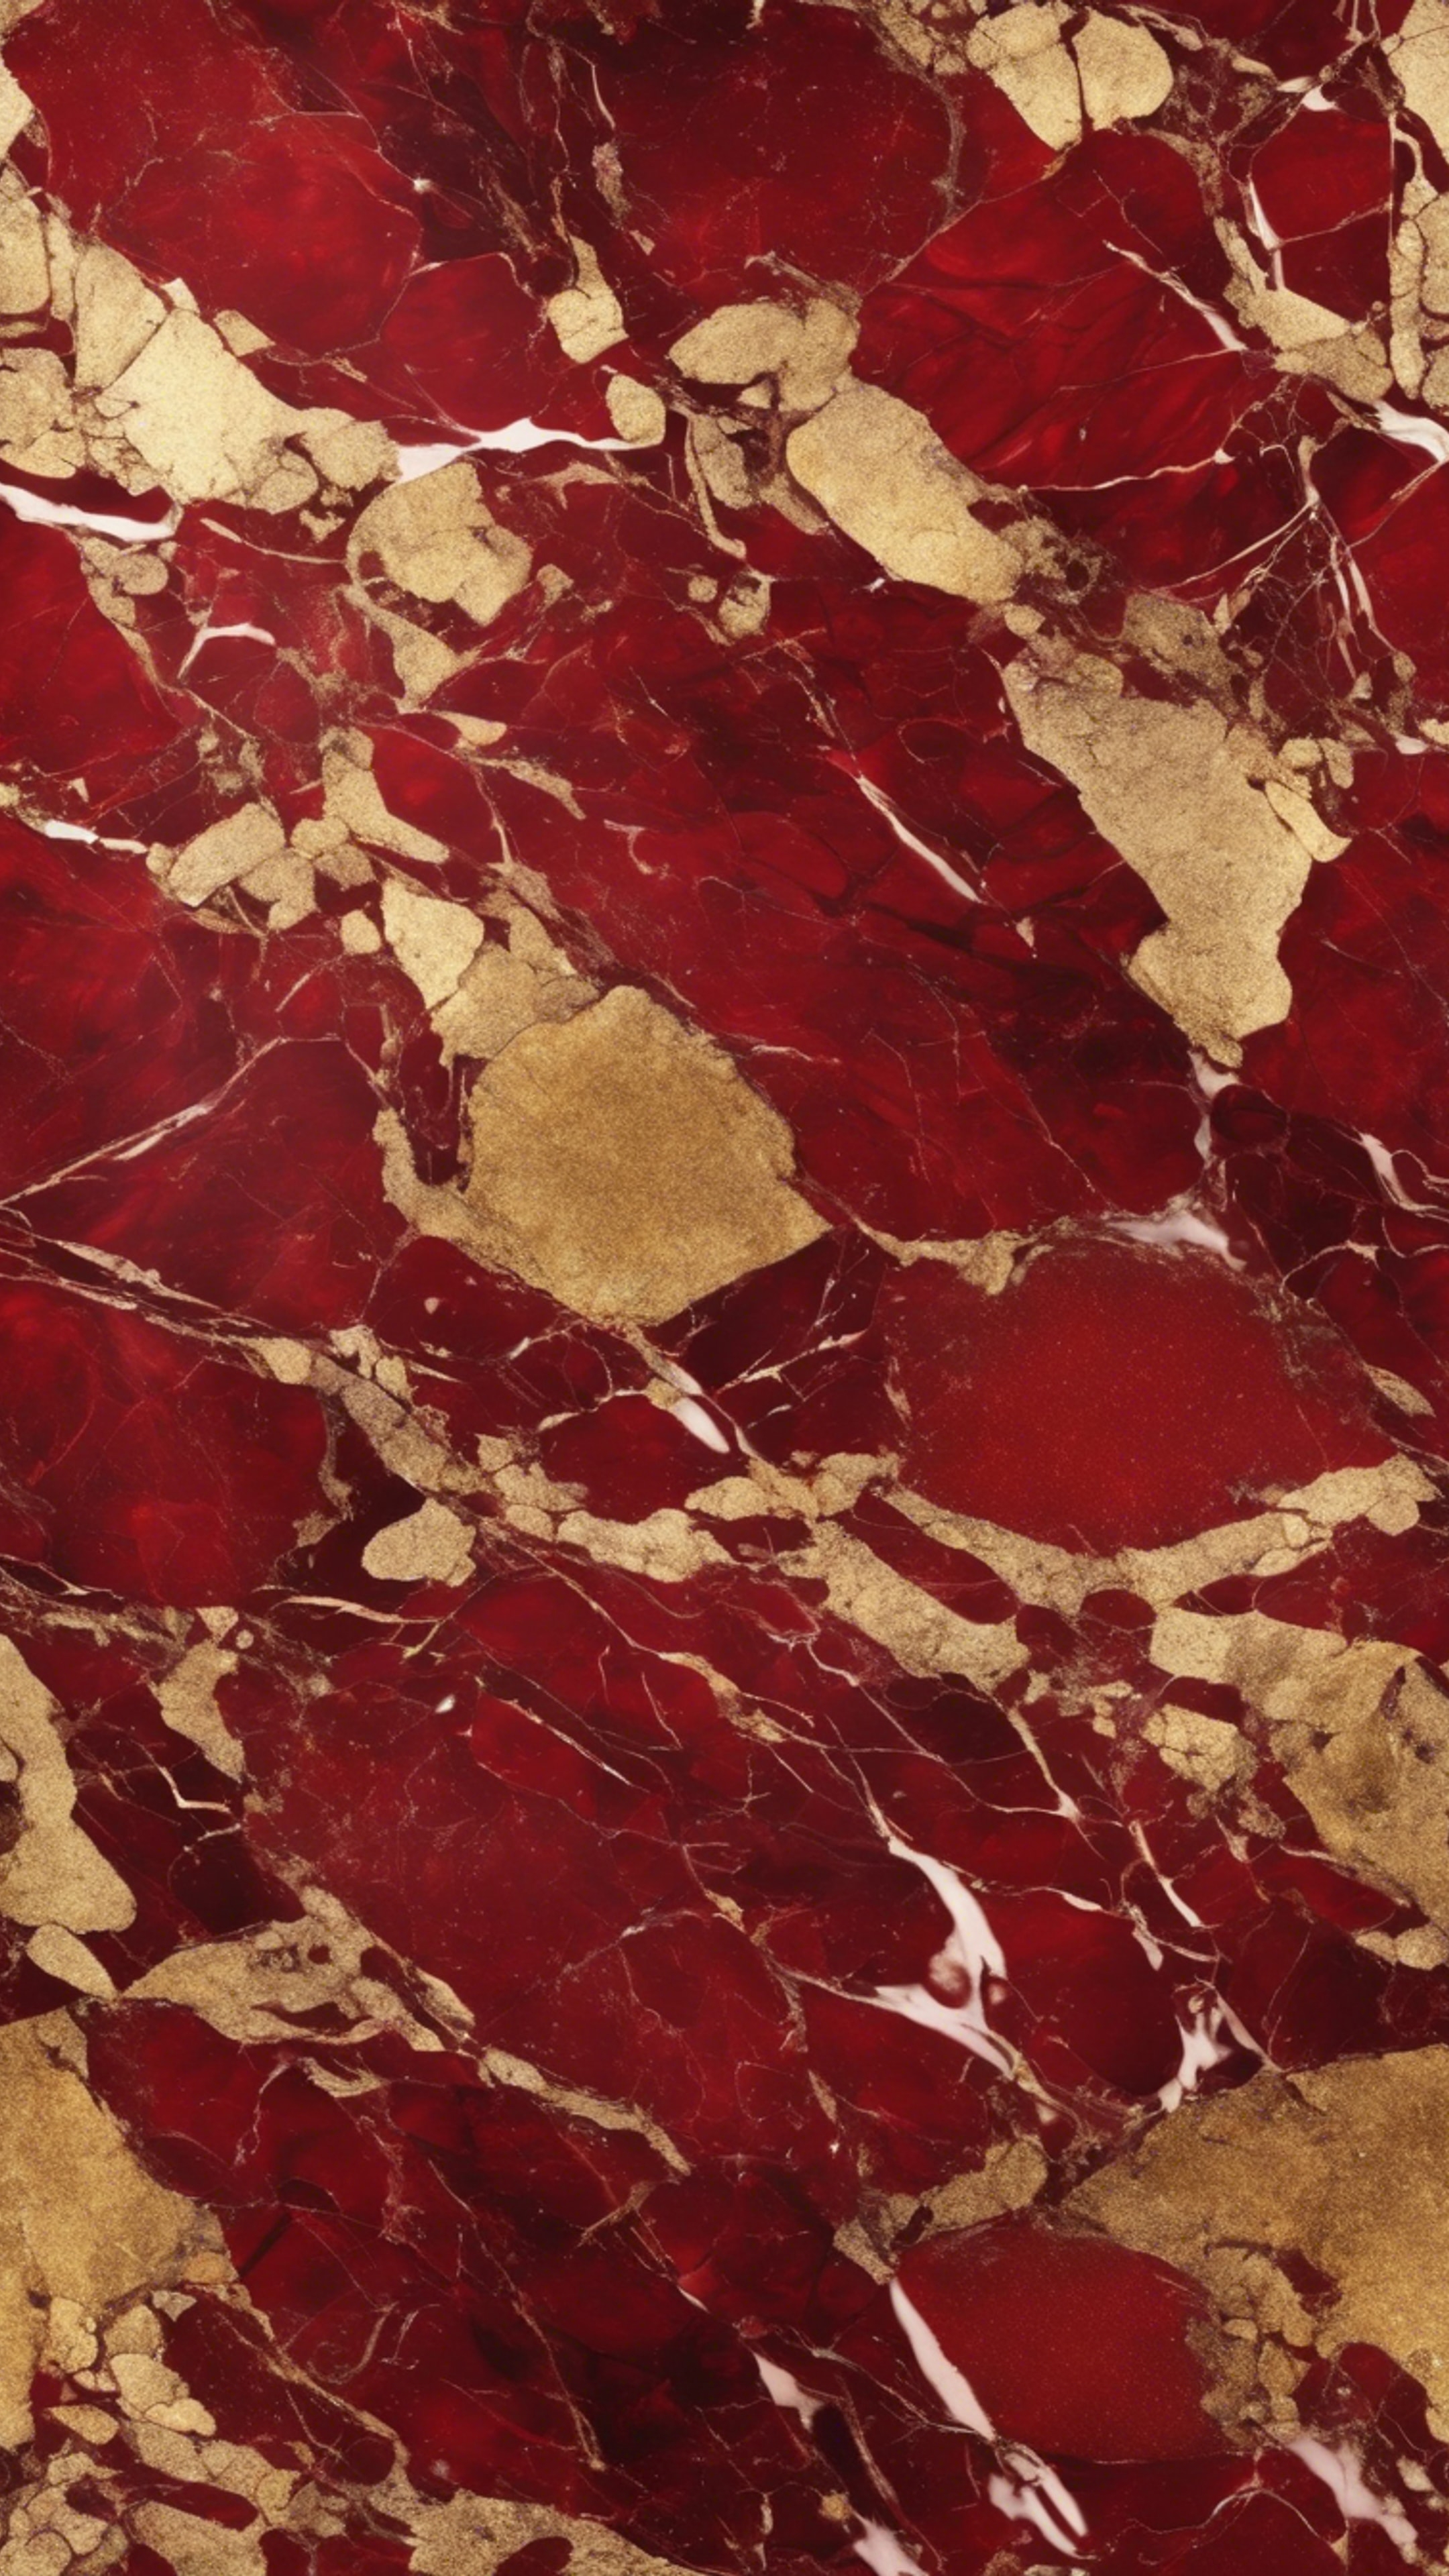 A play of rich red and shiny gold in a seamless marble pattern.壁紙[c352f9871c3046a1a297]